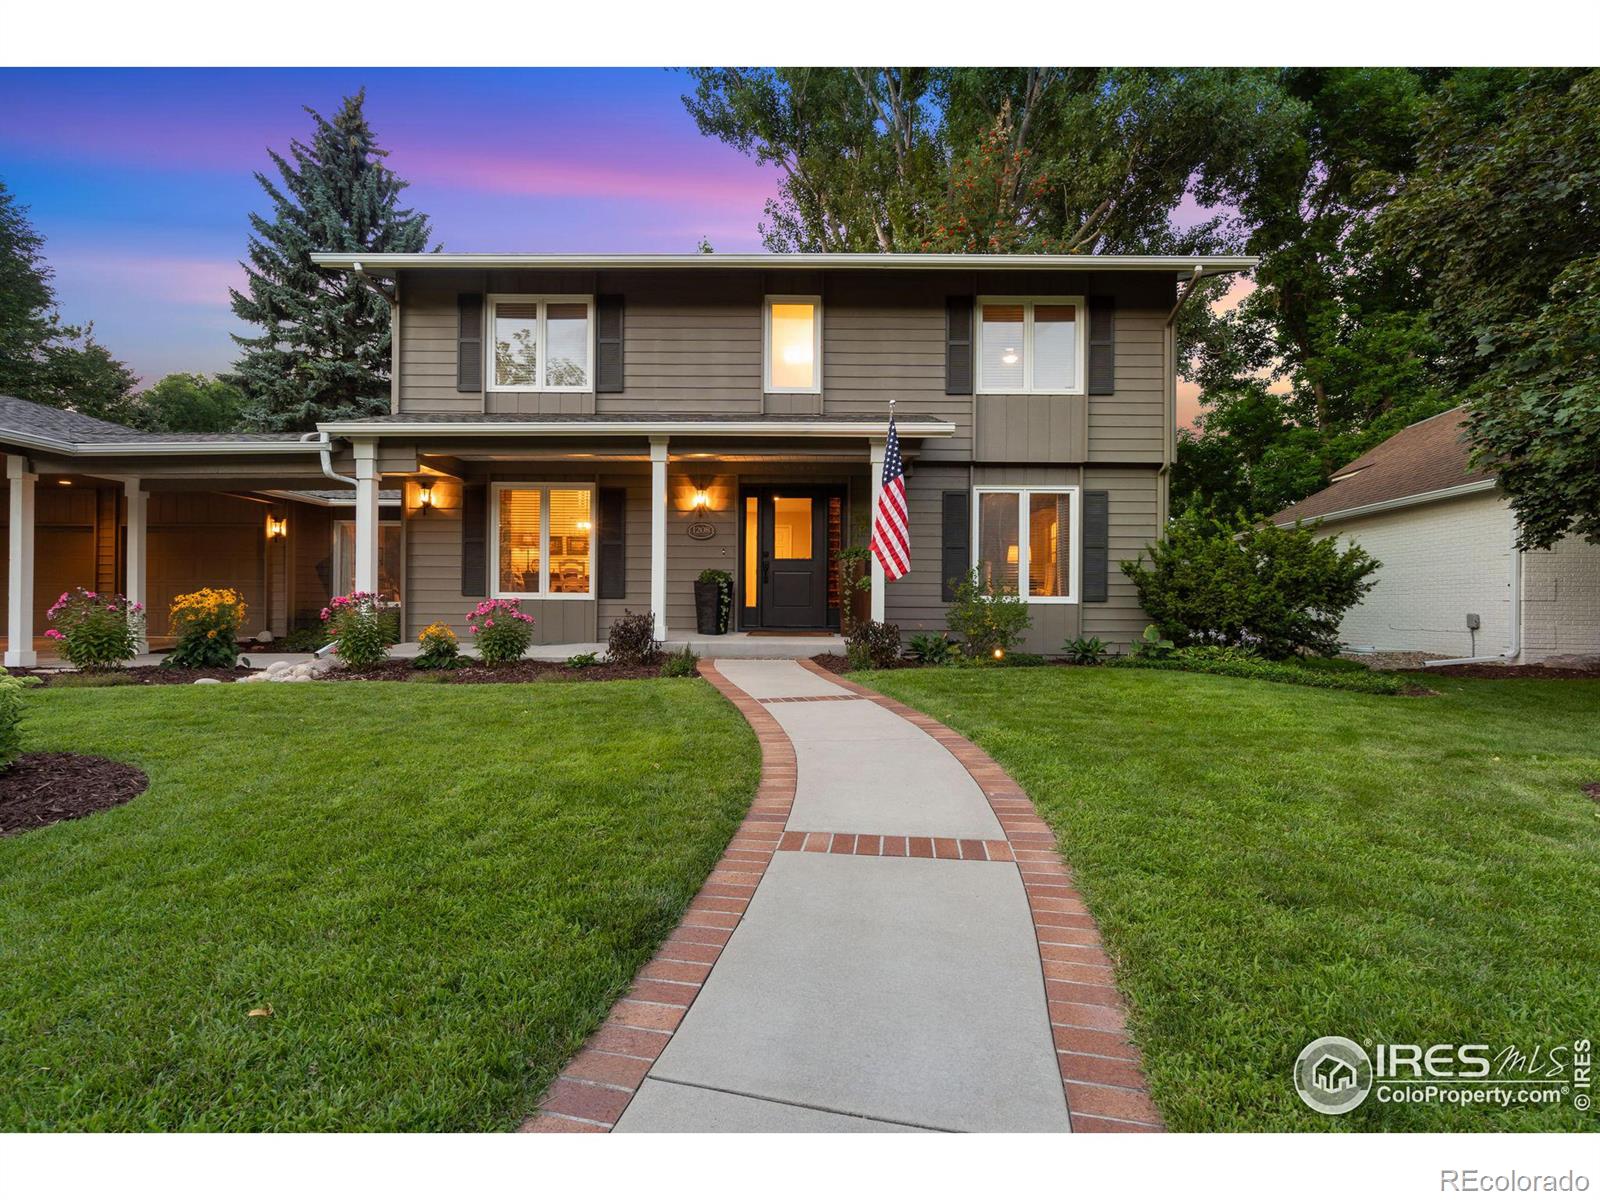 Report Image for 1208  Parkwood Drive,Fort Collins, Colorado